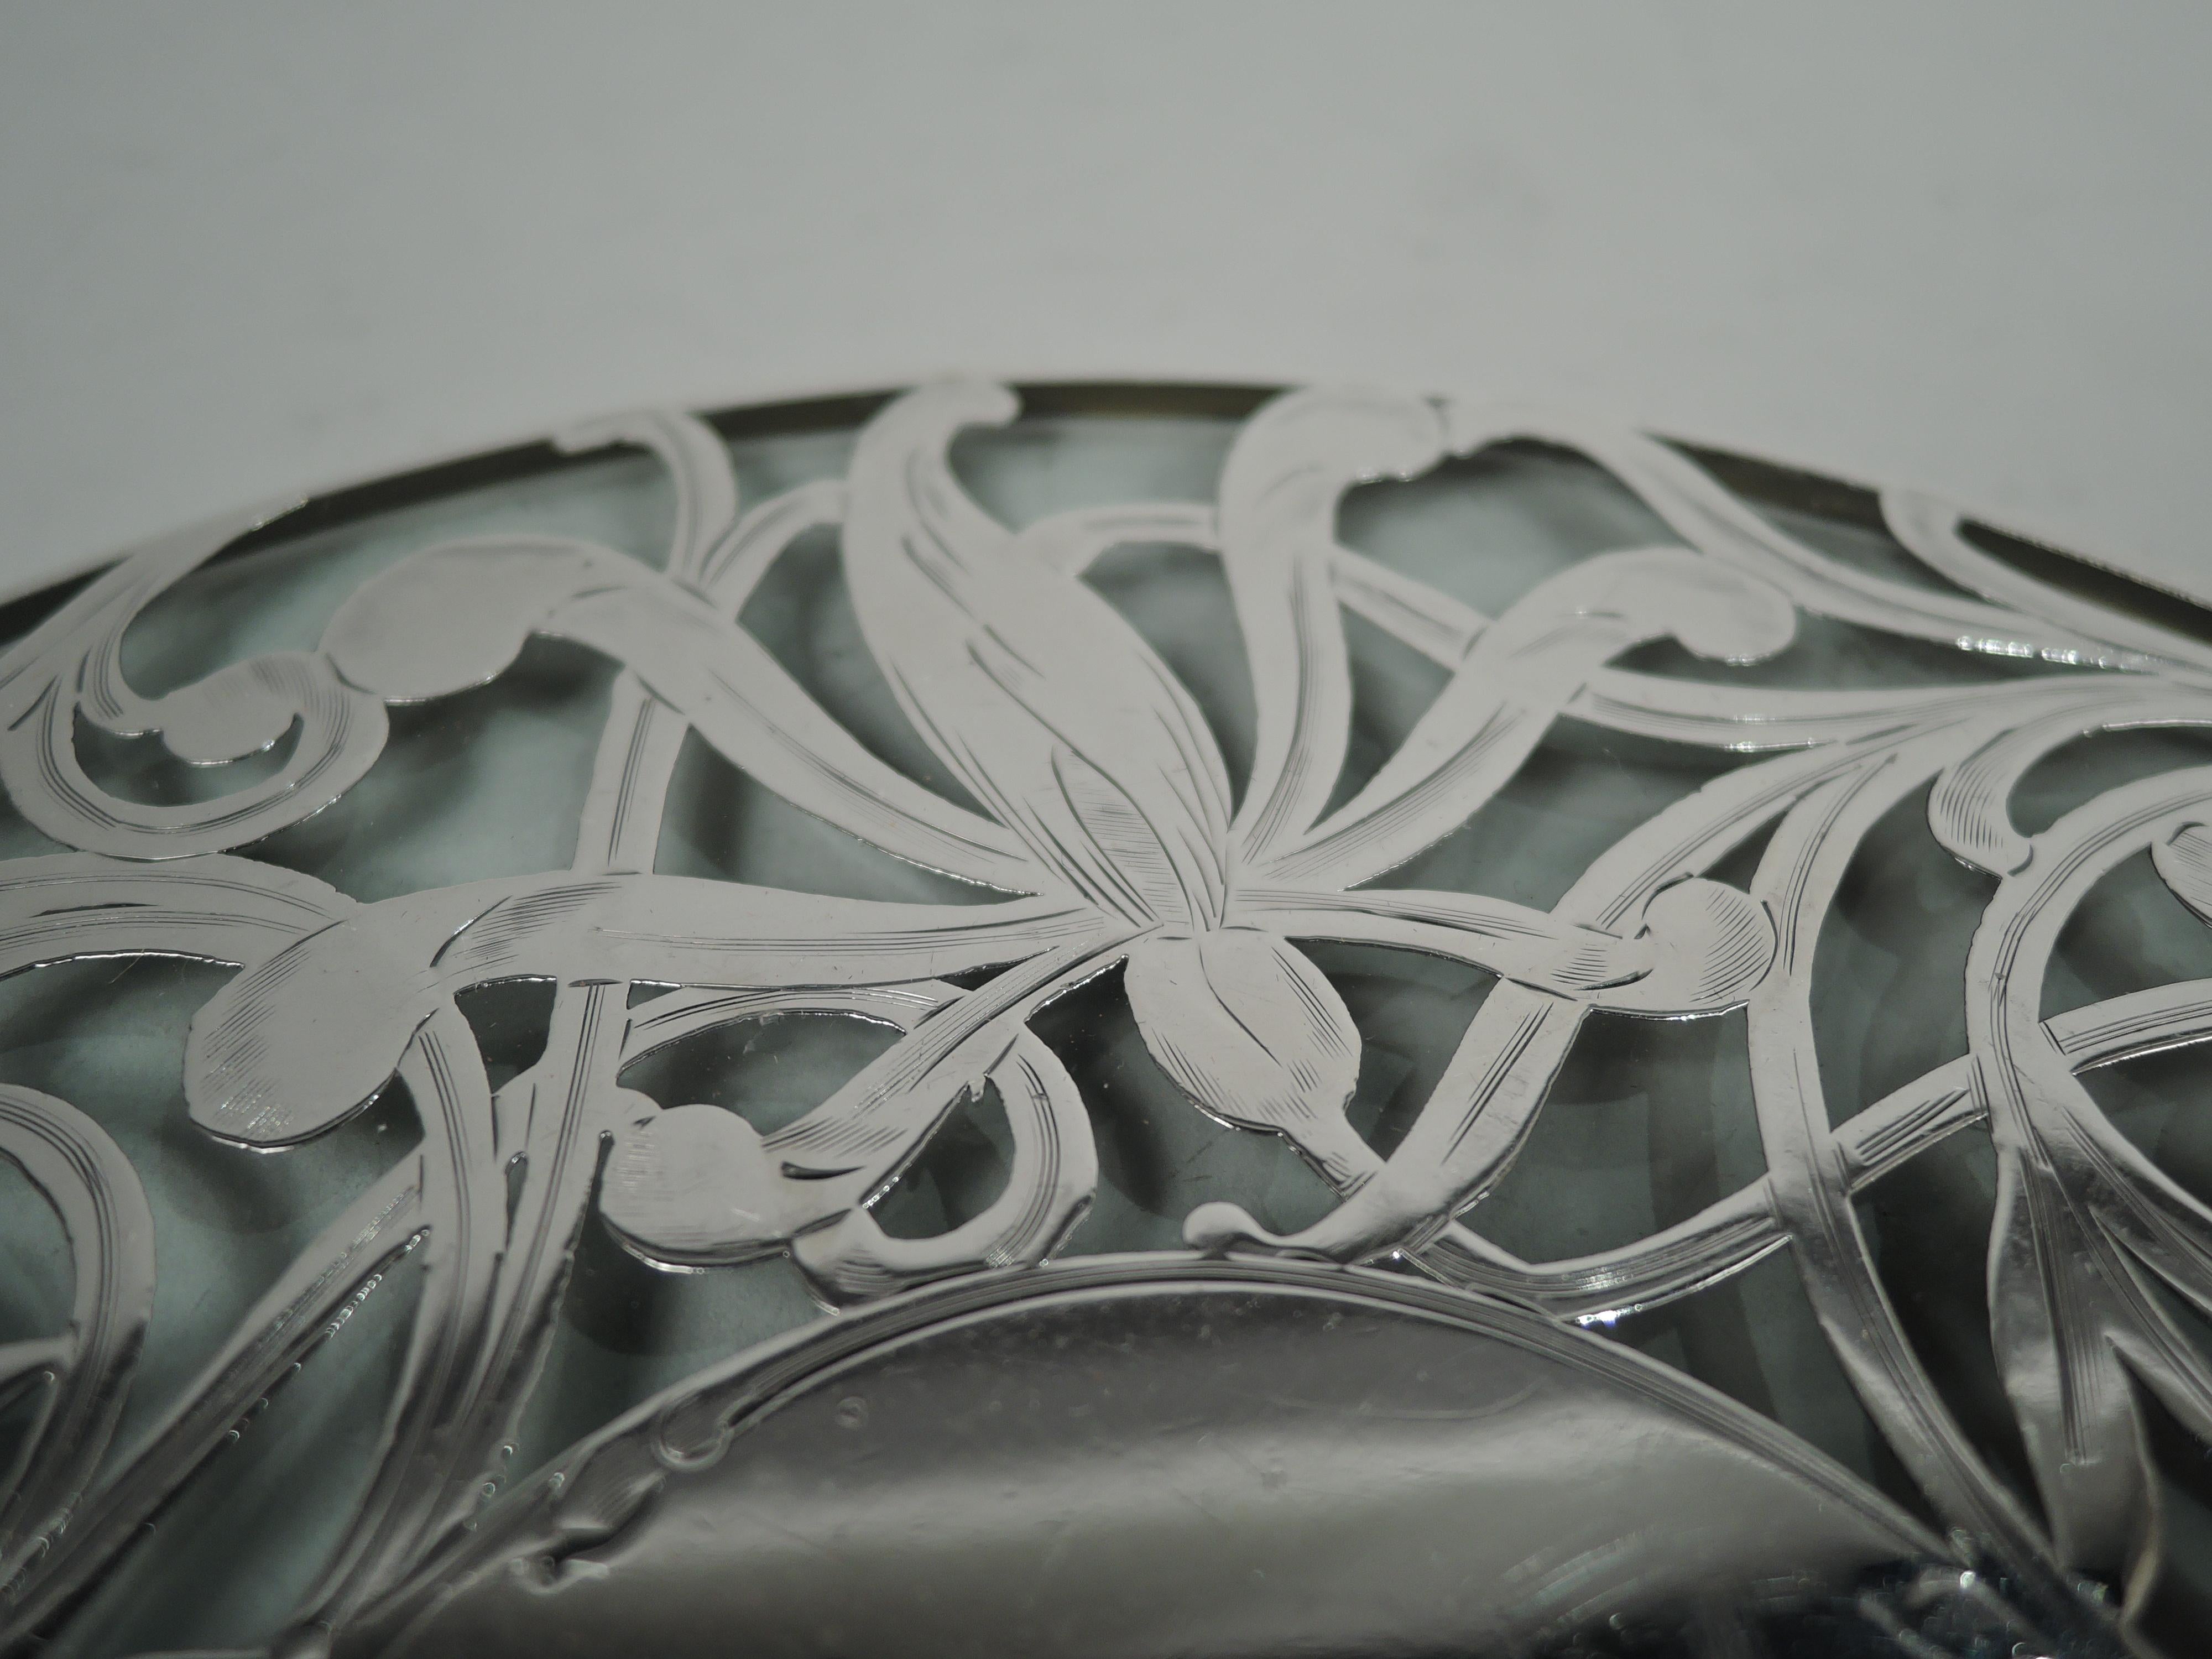 American Art Nouveau glass trivet with engraved silver overlay, ca 1900. Round with straight sides in silver collar. Overlay in form of scrolling and entwined tendrils and distended flowerheads. Center solid and vacant. Glass is clear.